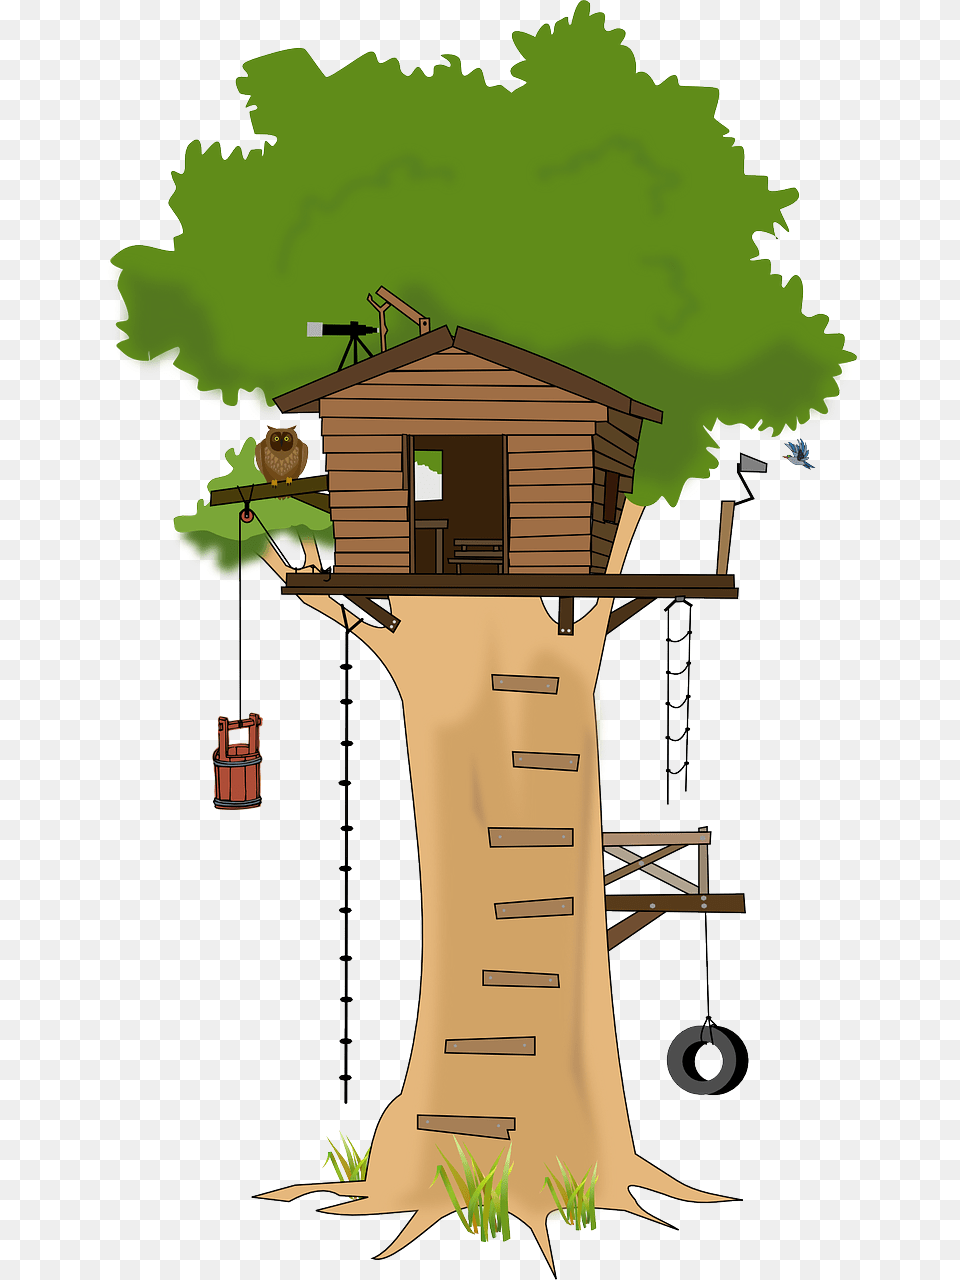 Tree House Format Ultra Background V Tree House Cartoon, Architecture, Building, Cabin, Housing Free Png